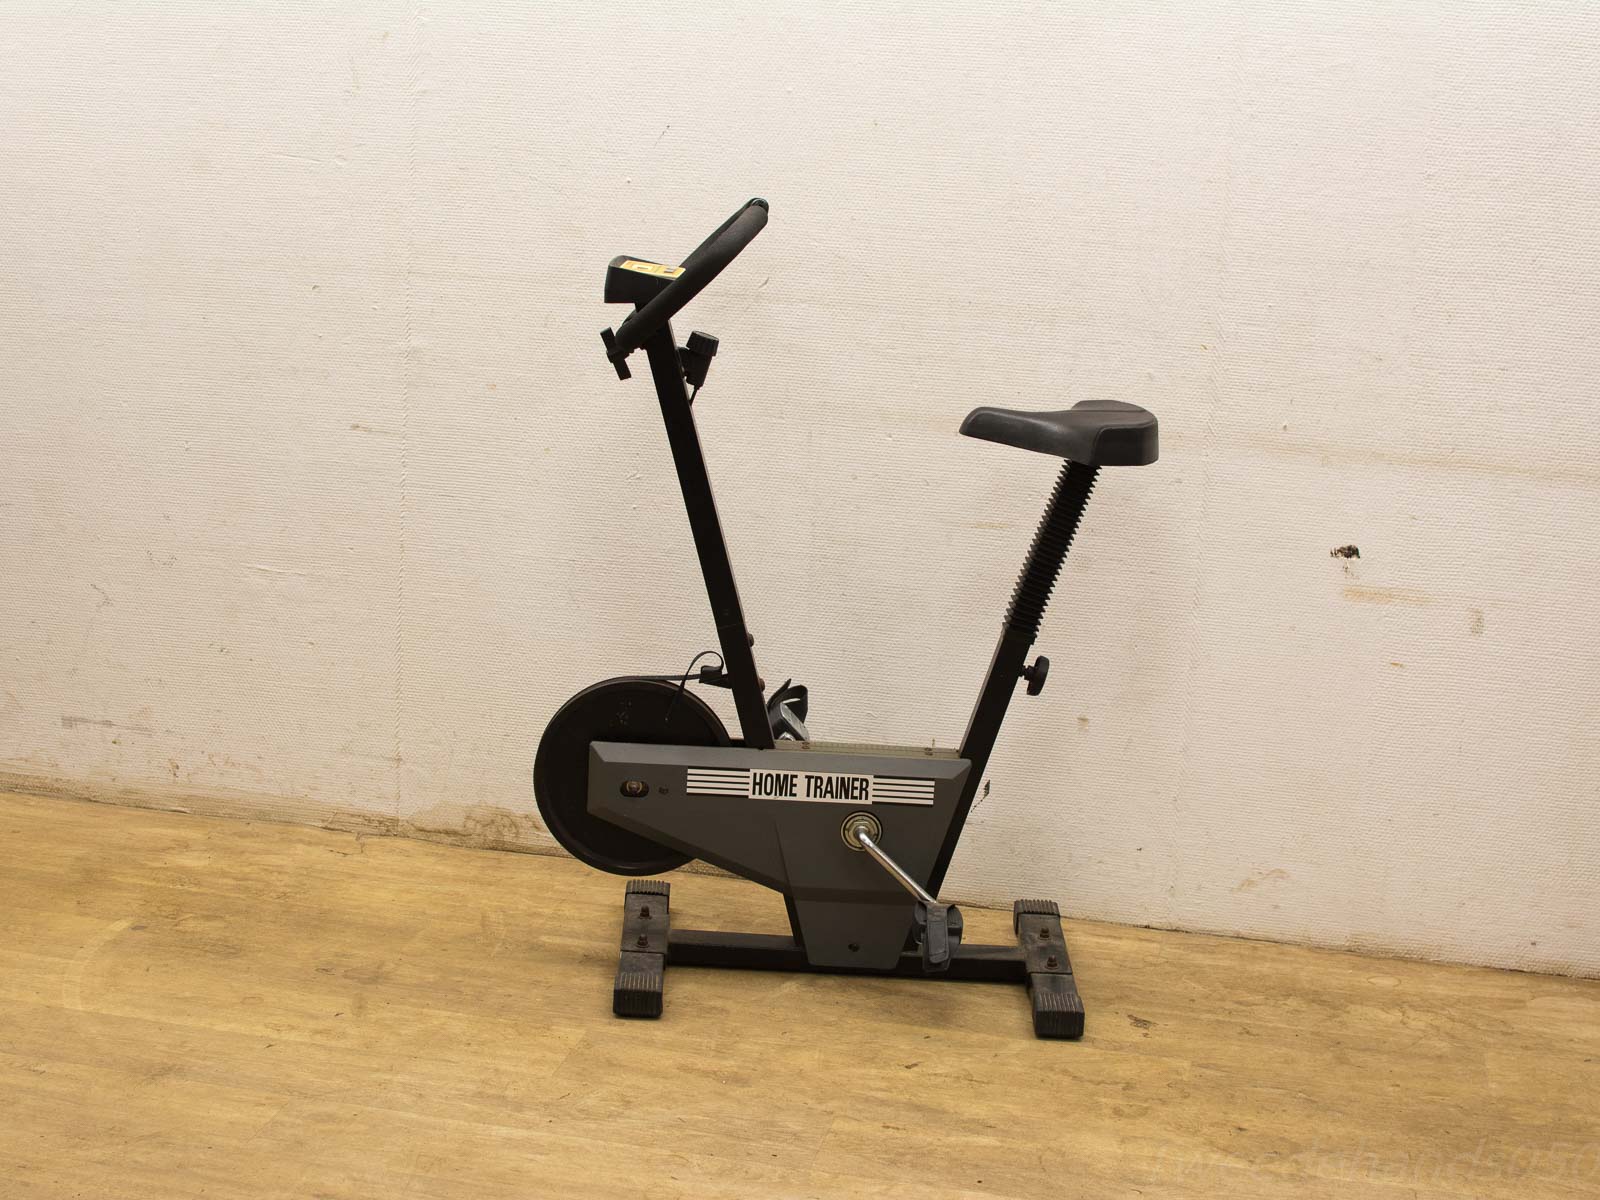 Home trainer  25634